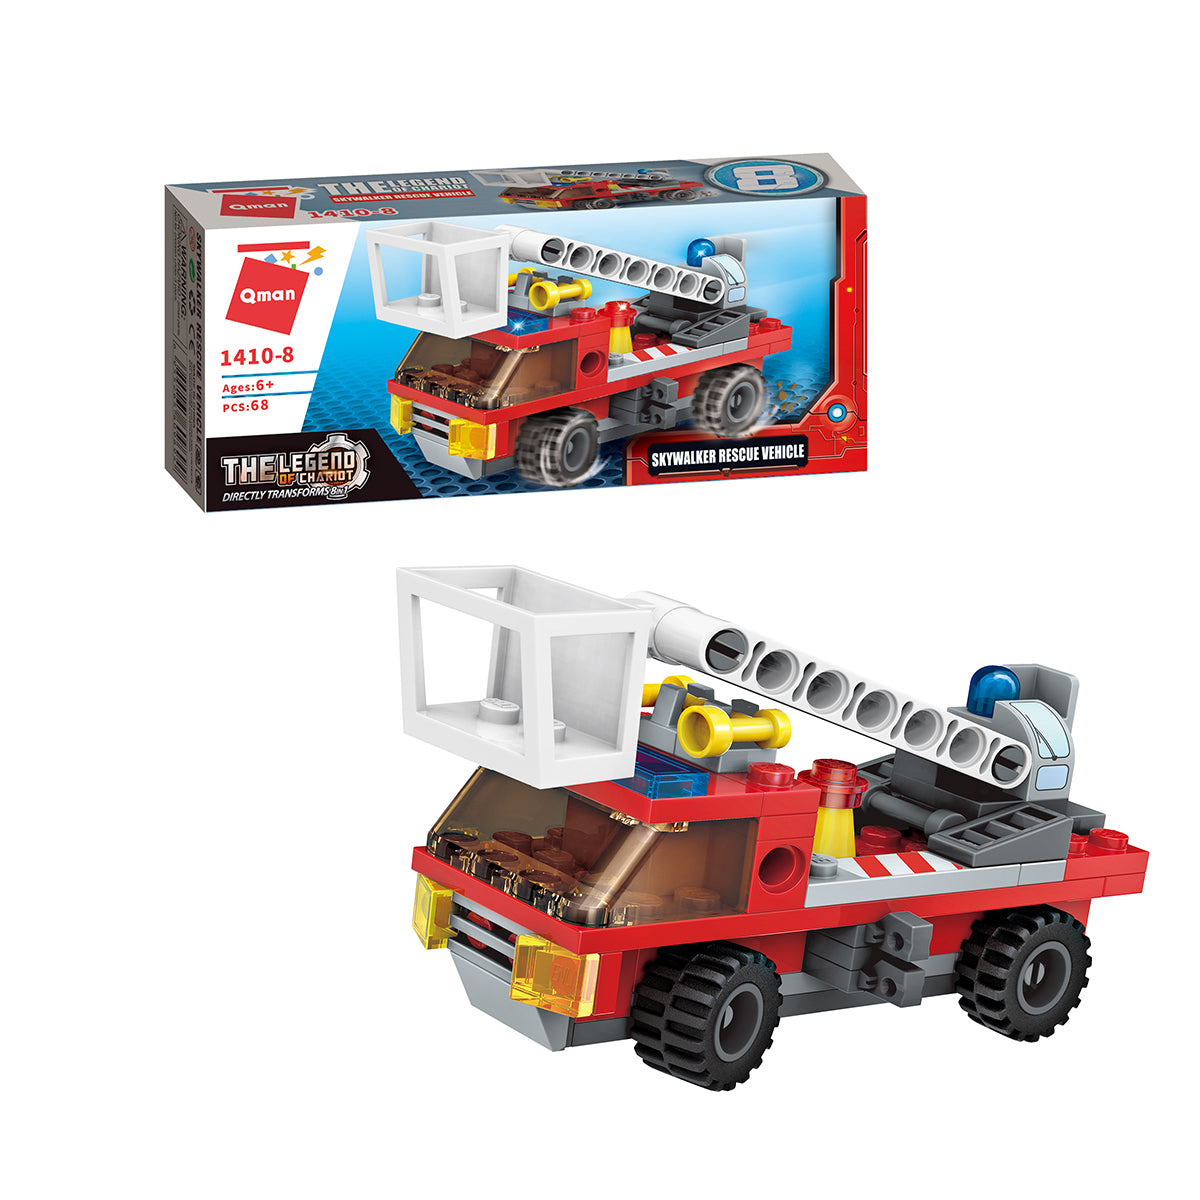 Qman The Legend of Chariot: Skywalker Rescue Vehicle (7681411514592)